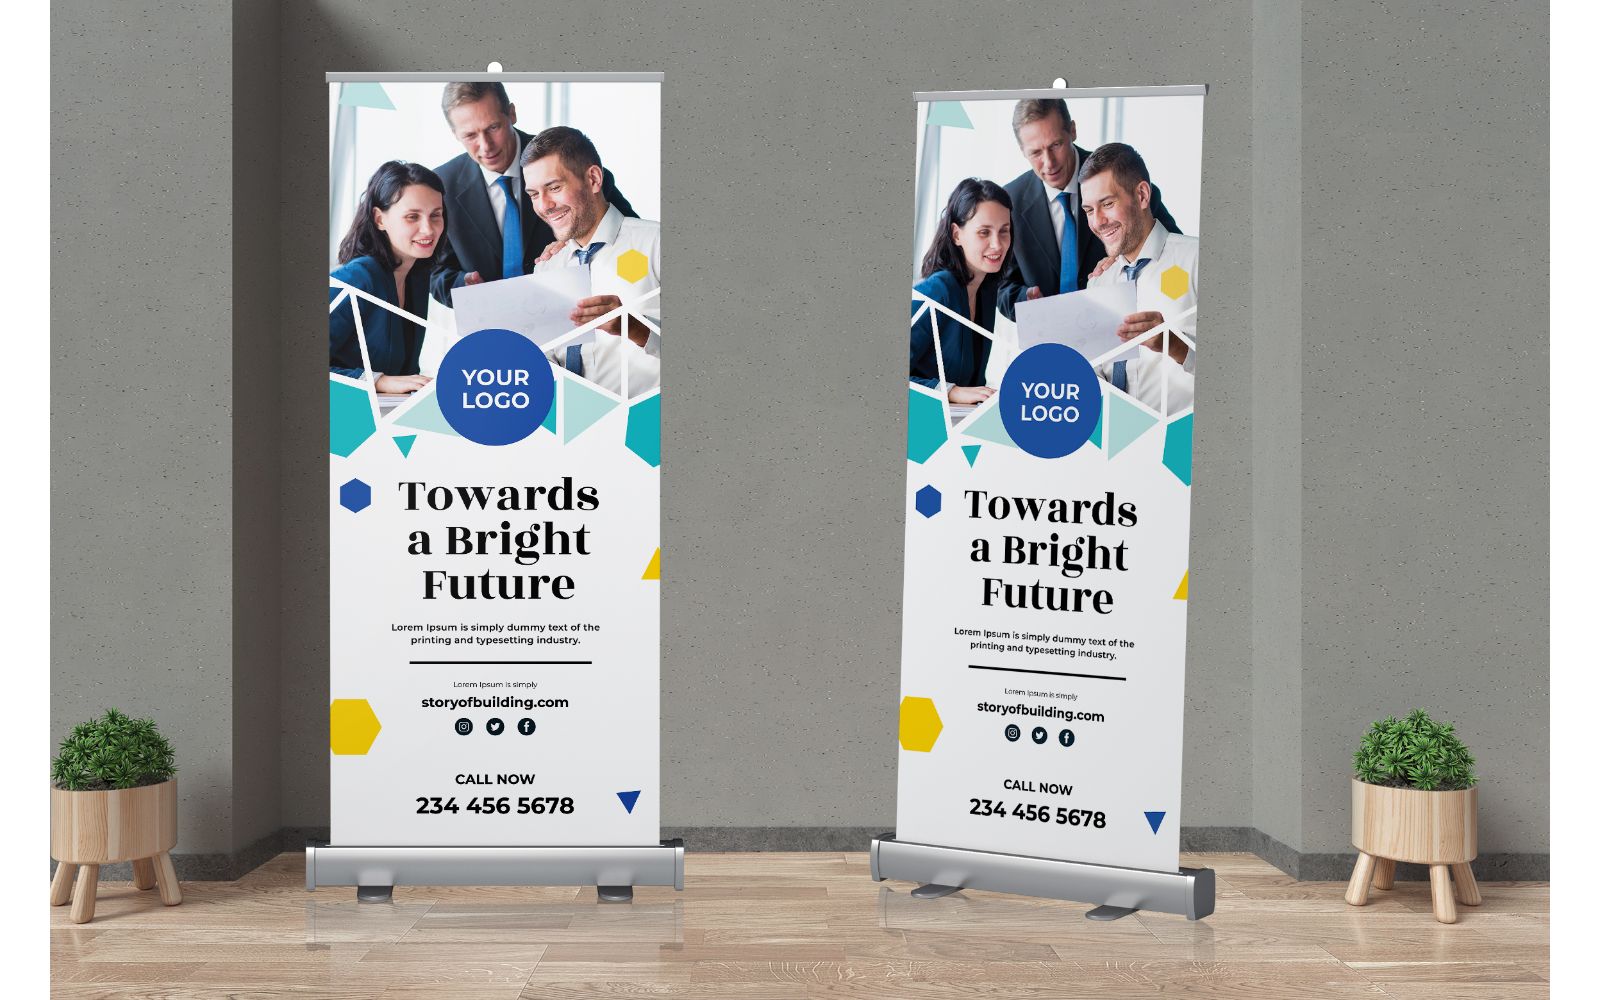 Roll Banner Towards a Bright Future - Corporate Identity Template